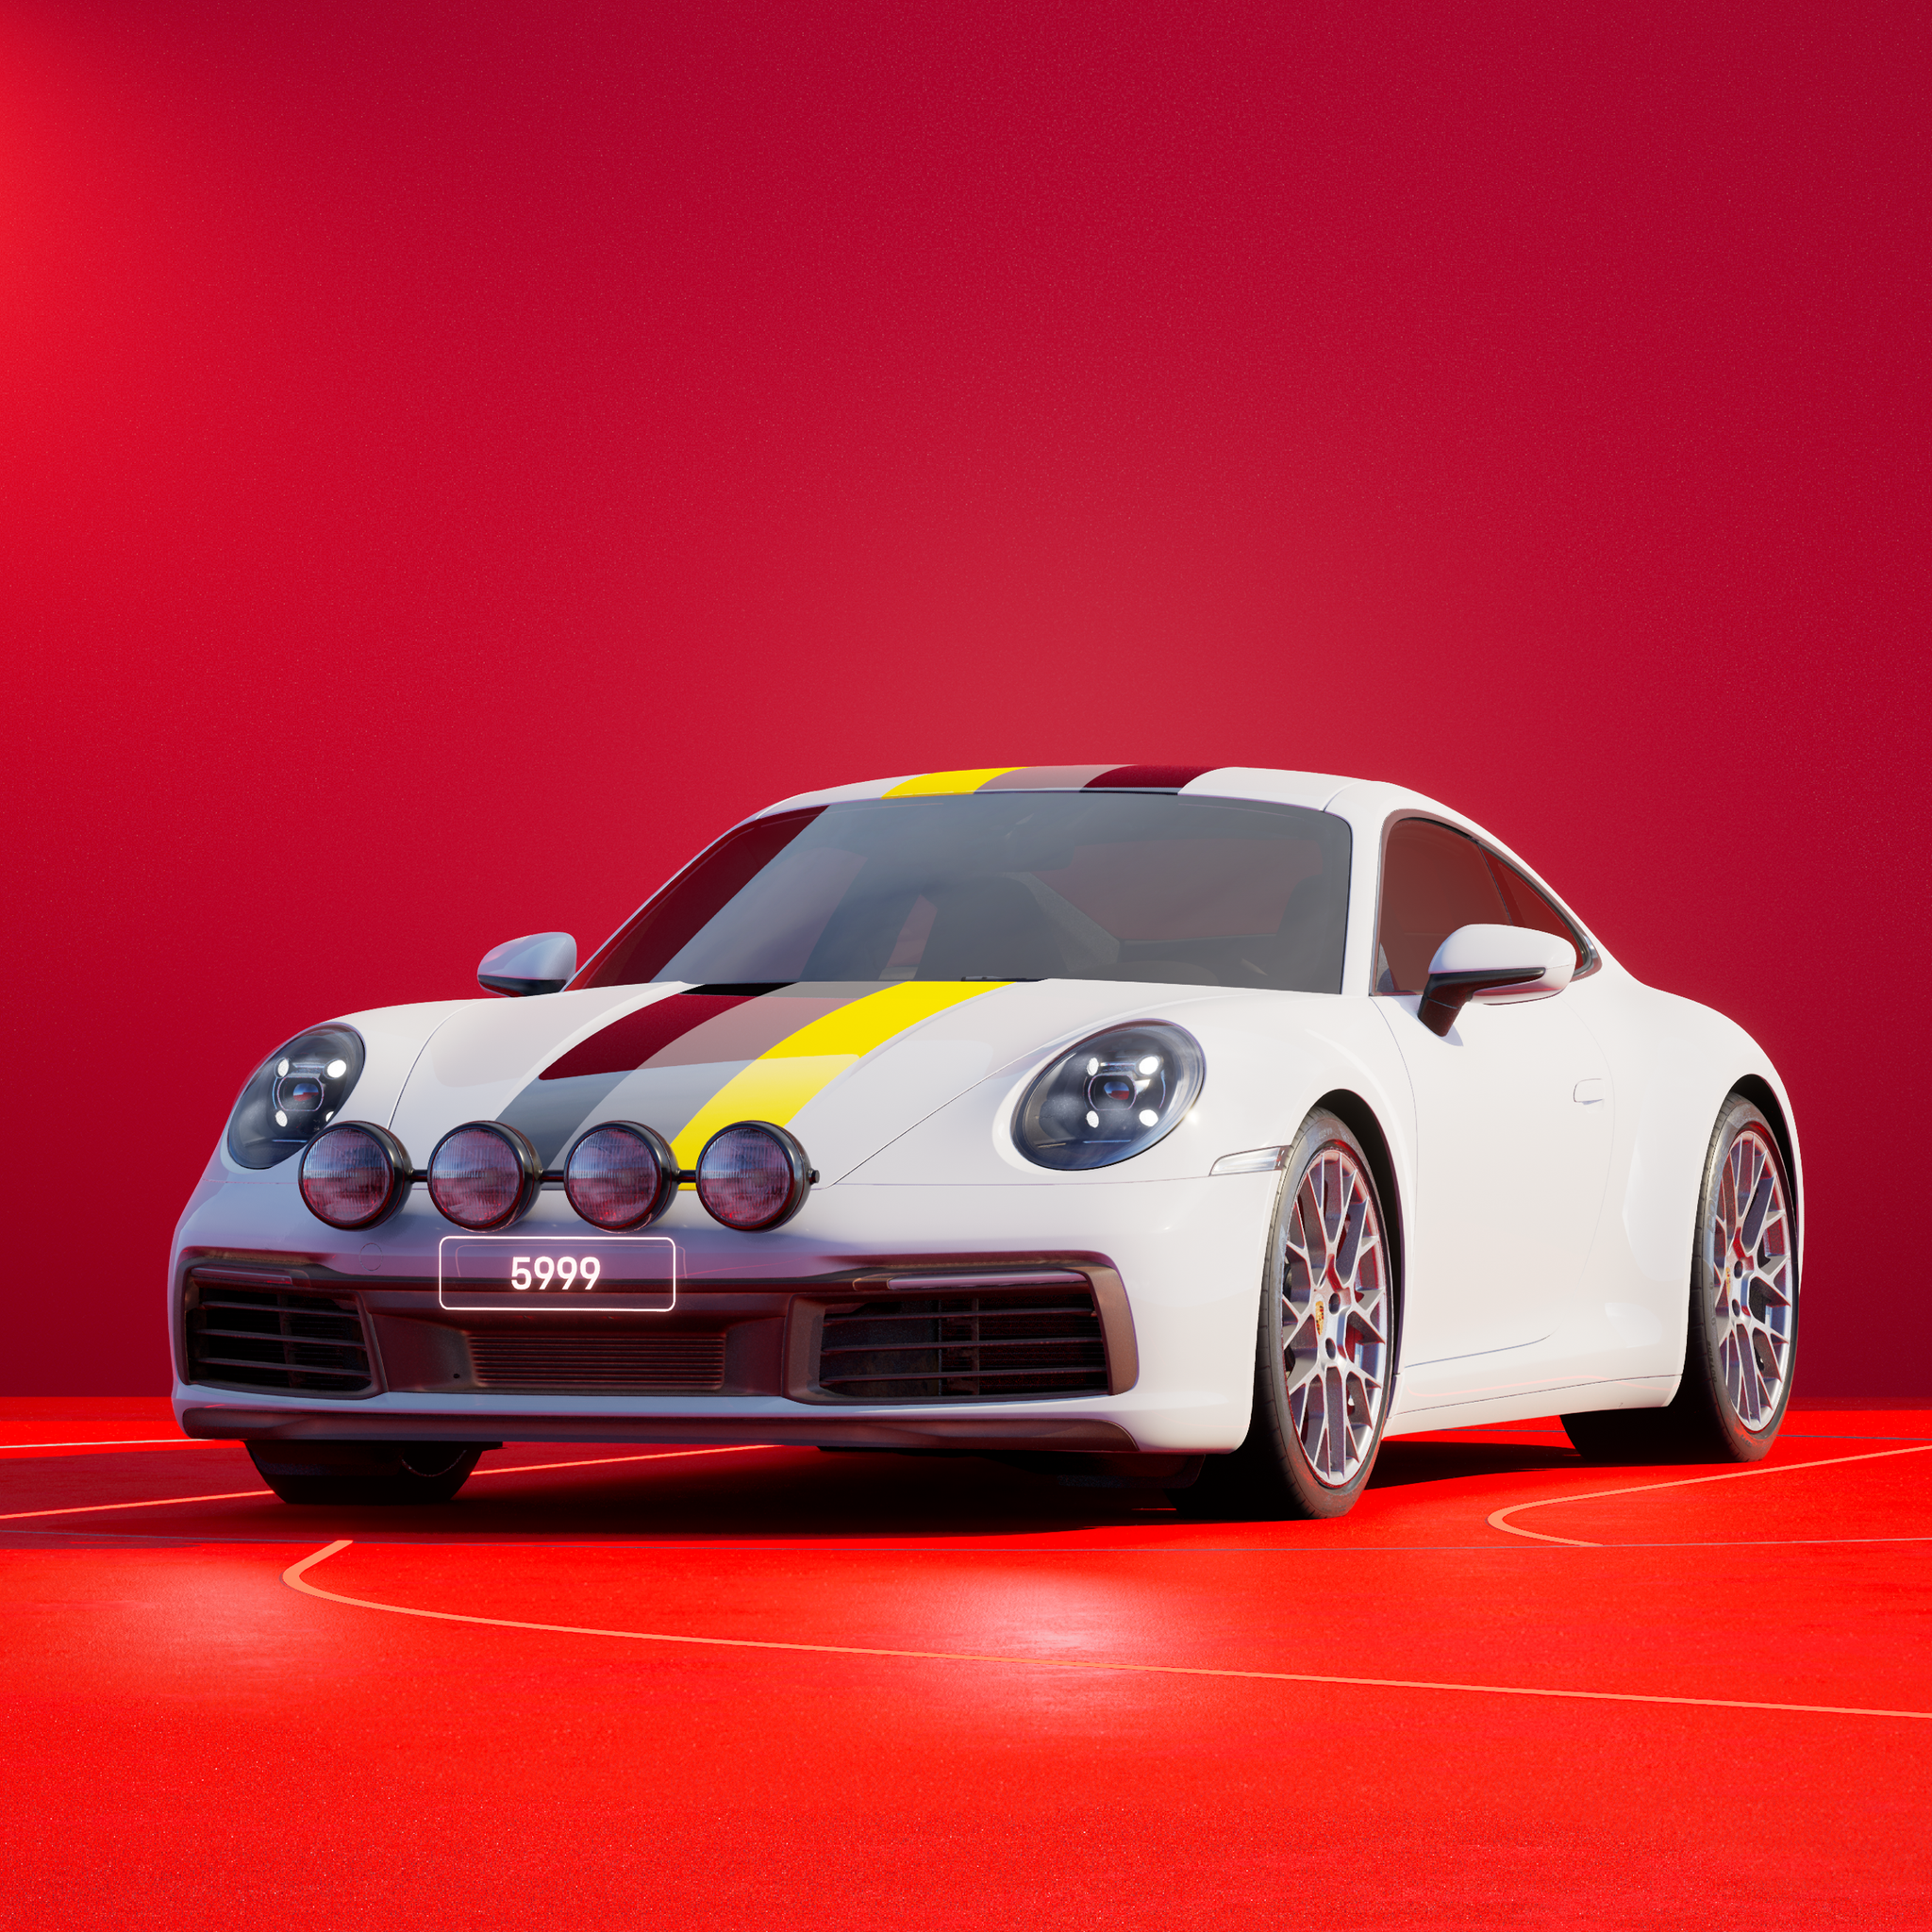 The PORSCHΞ 911 5999 image in phase